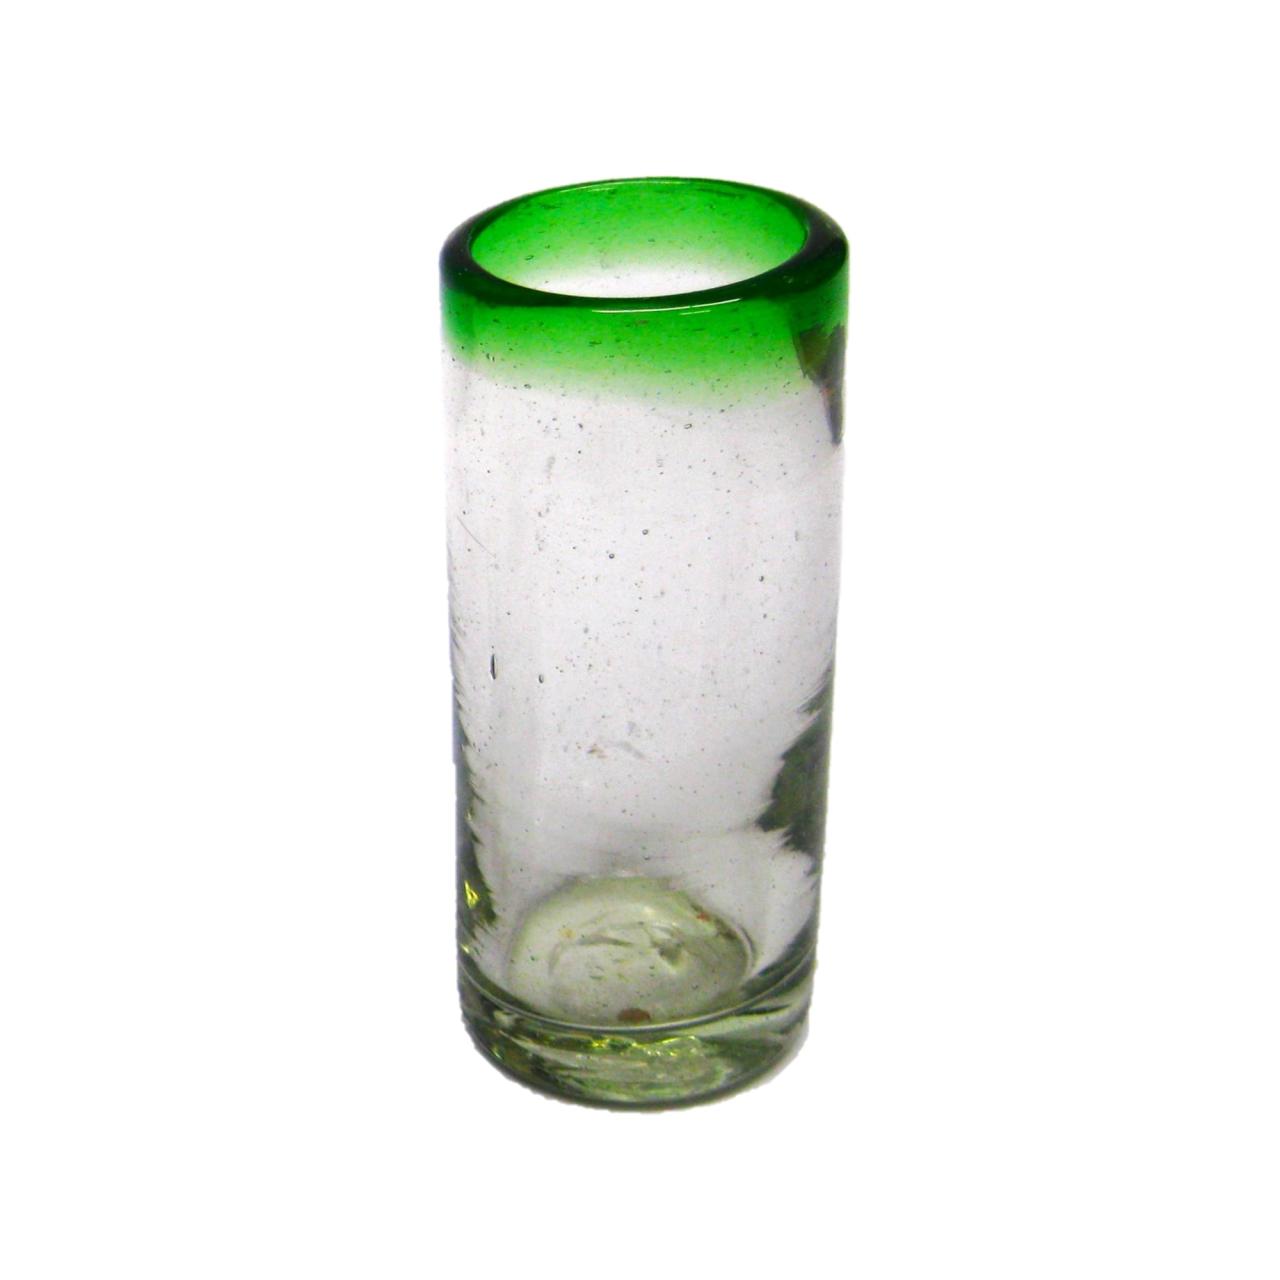 Colored Rim Glassware / Emerald Green Rim 2 oz Tequila Shot Glasses (set of 6) / These shot glasses bordered in emerald green are perfect for sipping your favourite tequila or any other liquor.